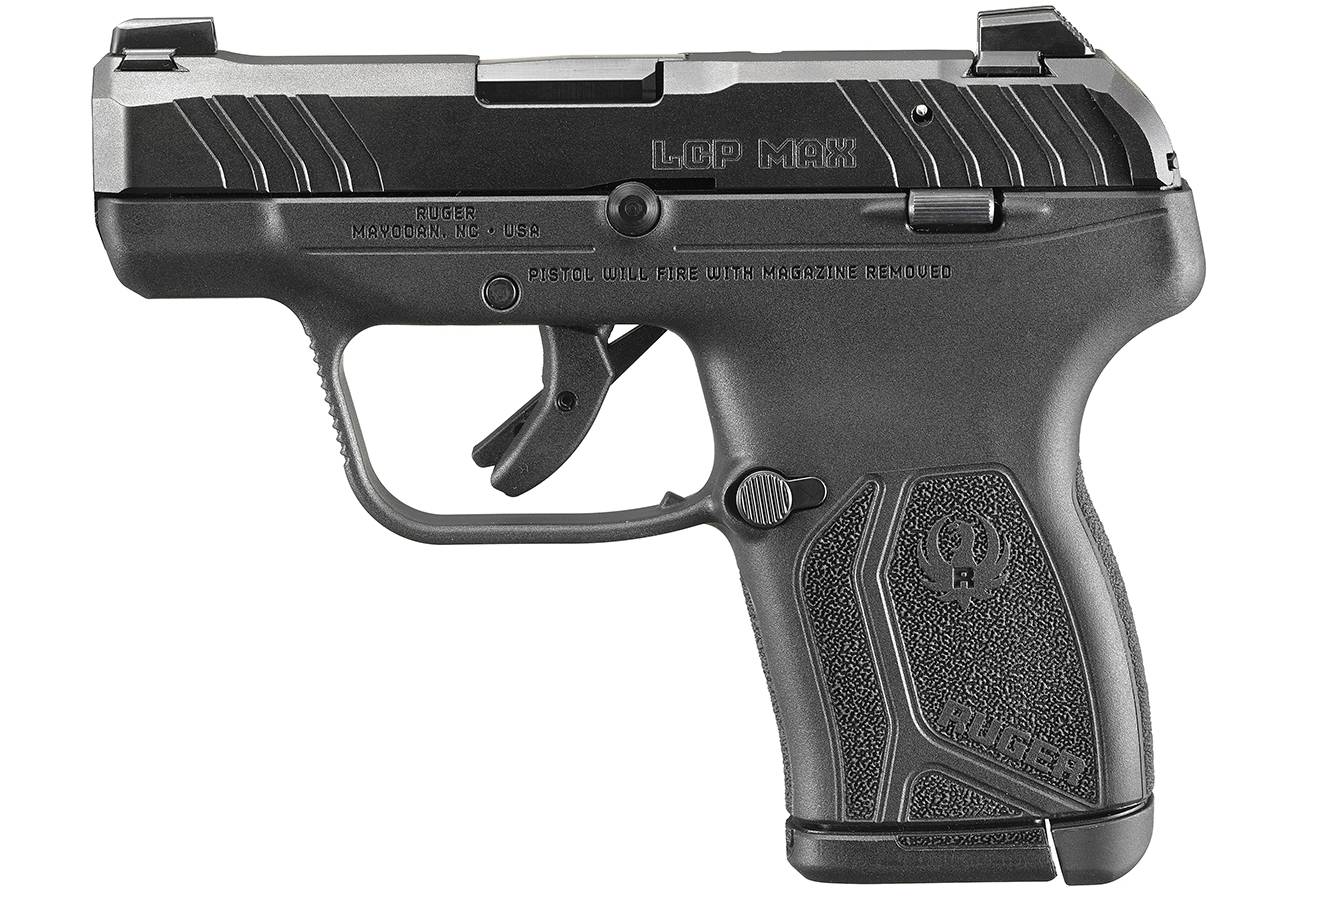 Ruger LCP Max 380 ACP 10+1 Carry Conceal Pistol with Tritium Front Sight